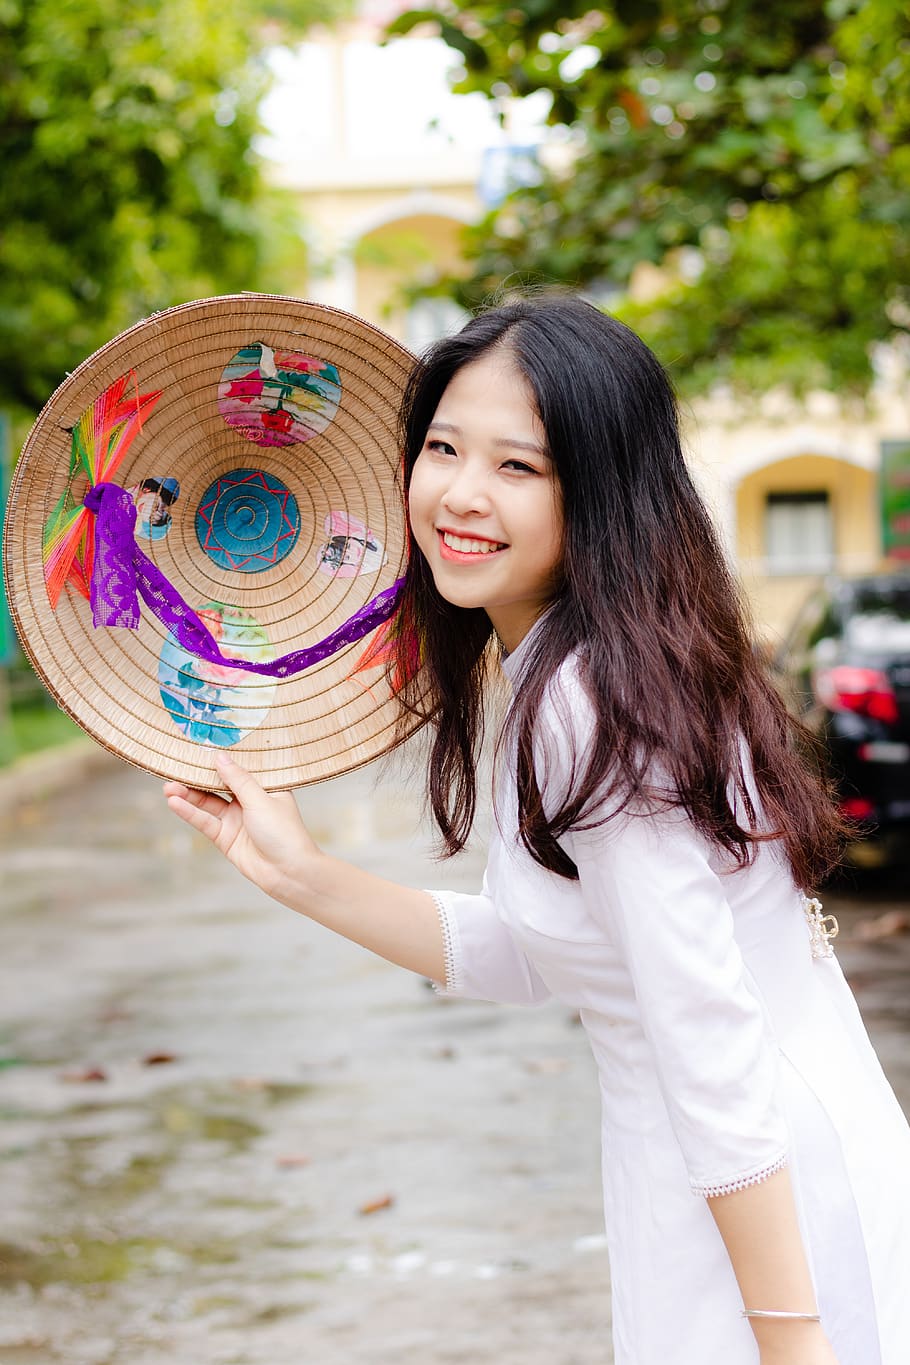 vietnamese, vietnam girl, teacher, aodai, girl, one person, real people, smiling, leisure activity, focus on foreground